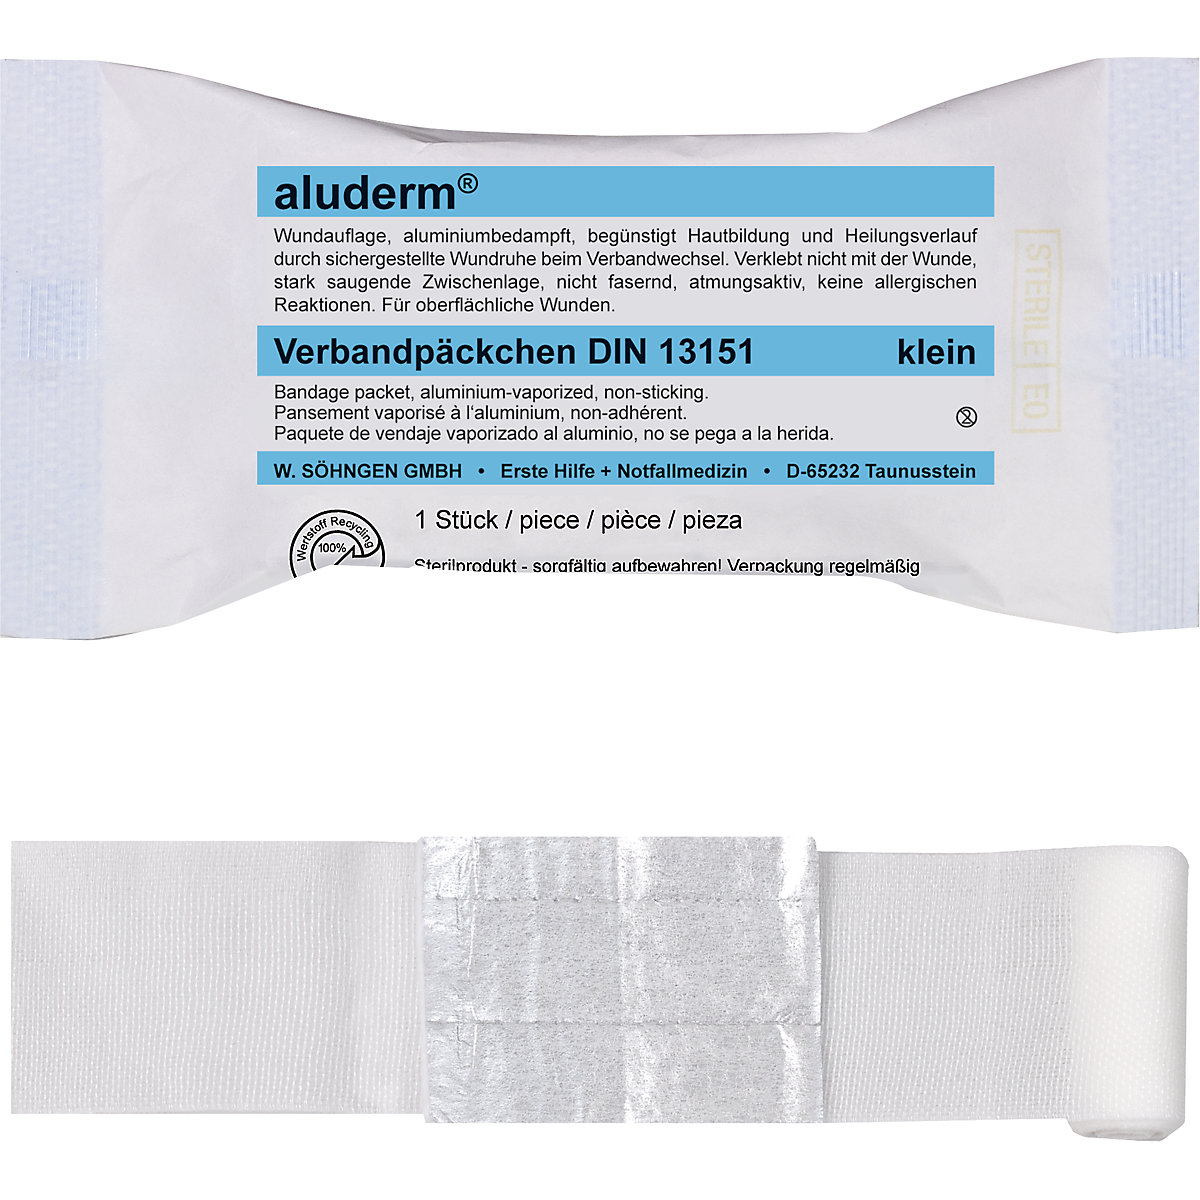 aluderm® bandage pack: content compliant with DIN 13151, 20+ items